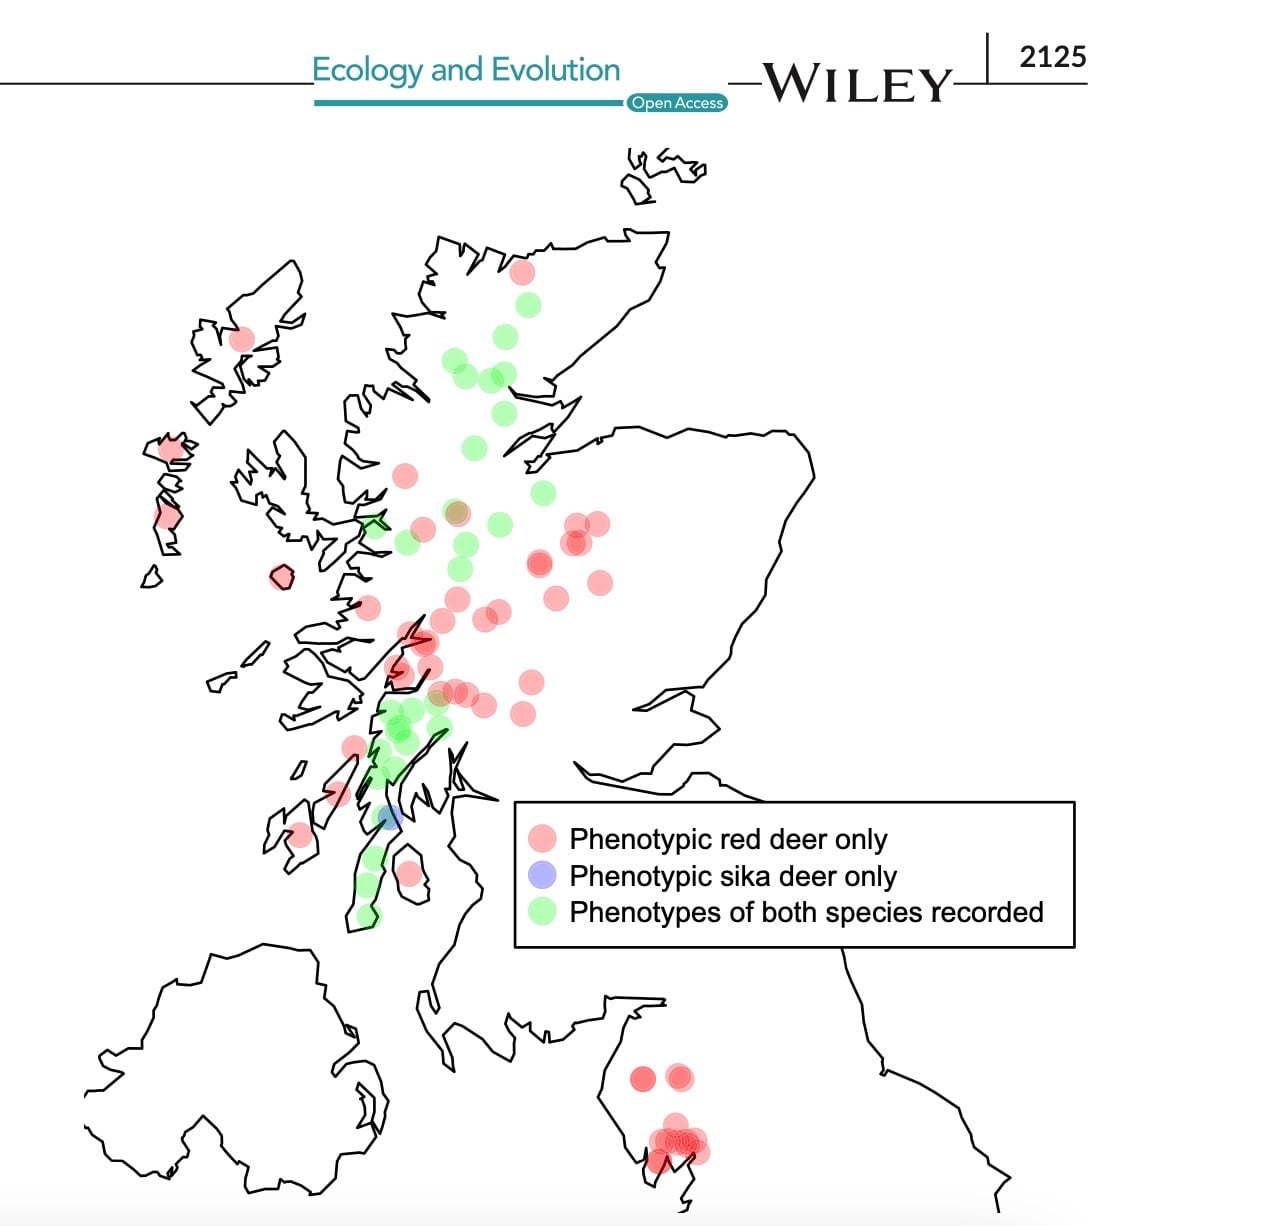 Parts of Scotland where red deer are genetically pure, including the South Uist refugia.